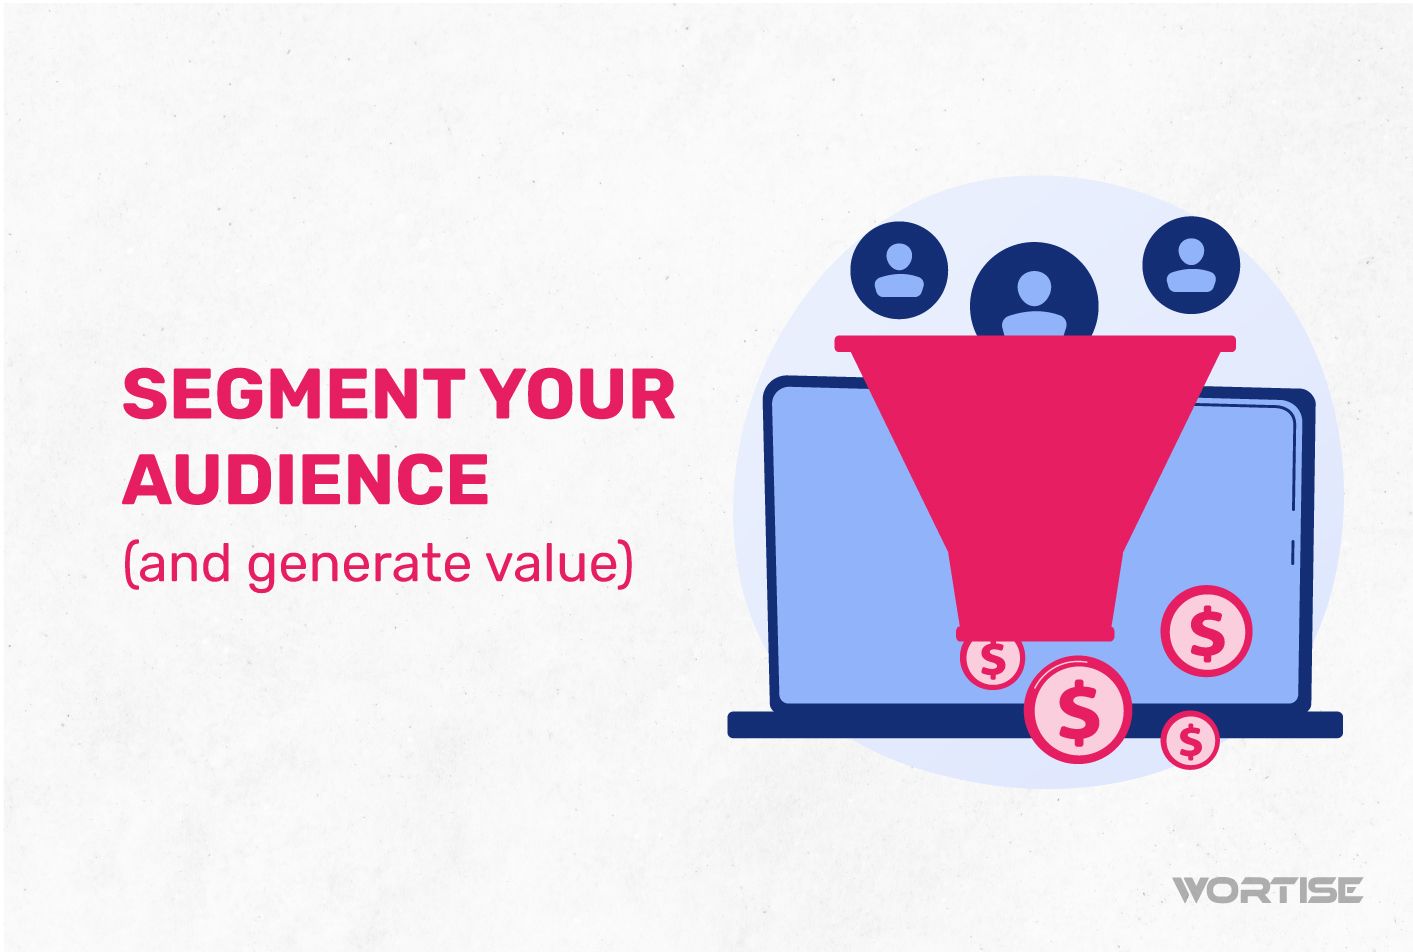 Mobile App User Segmentation: 4 Parameters to Segment Your Audience and Generate Long-Term Value